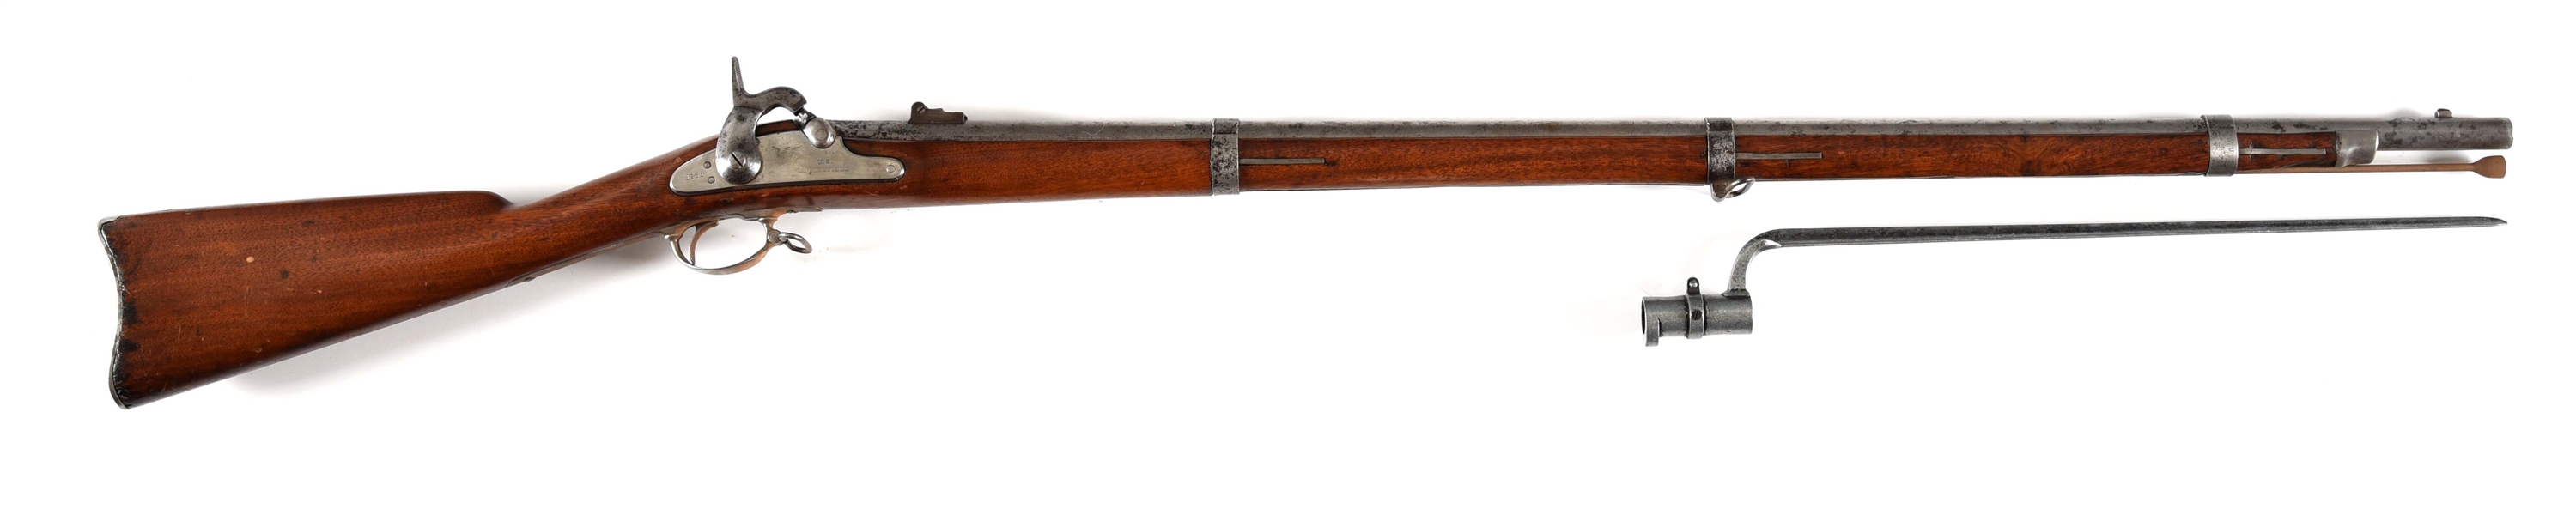 (A) US MODEL 1861 PERCUSSION RIFLED MUSKET BY SPRINGFIELD.